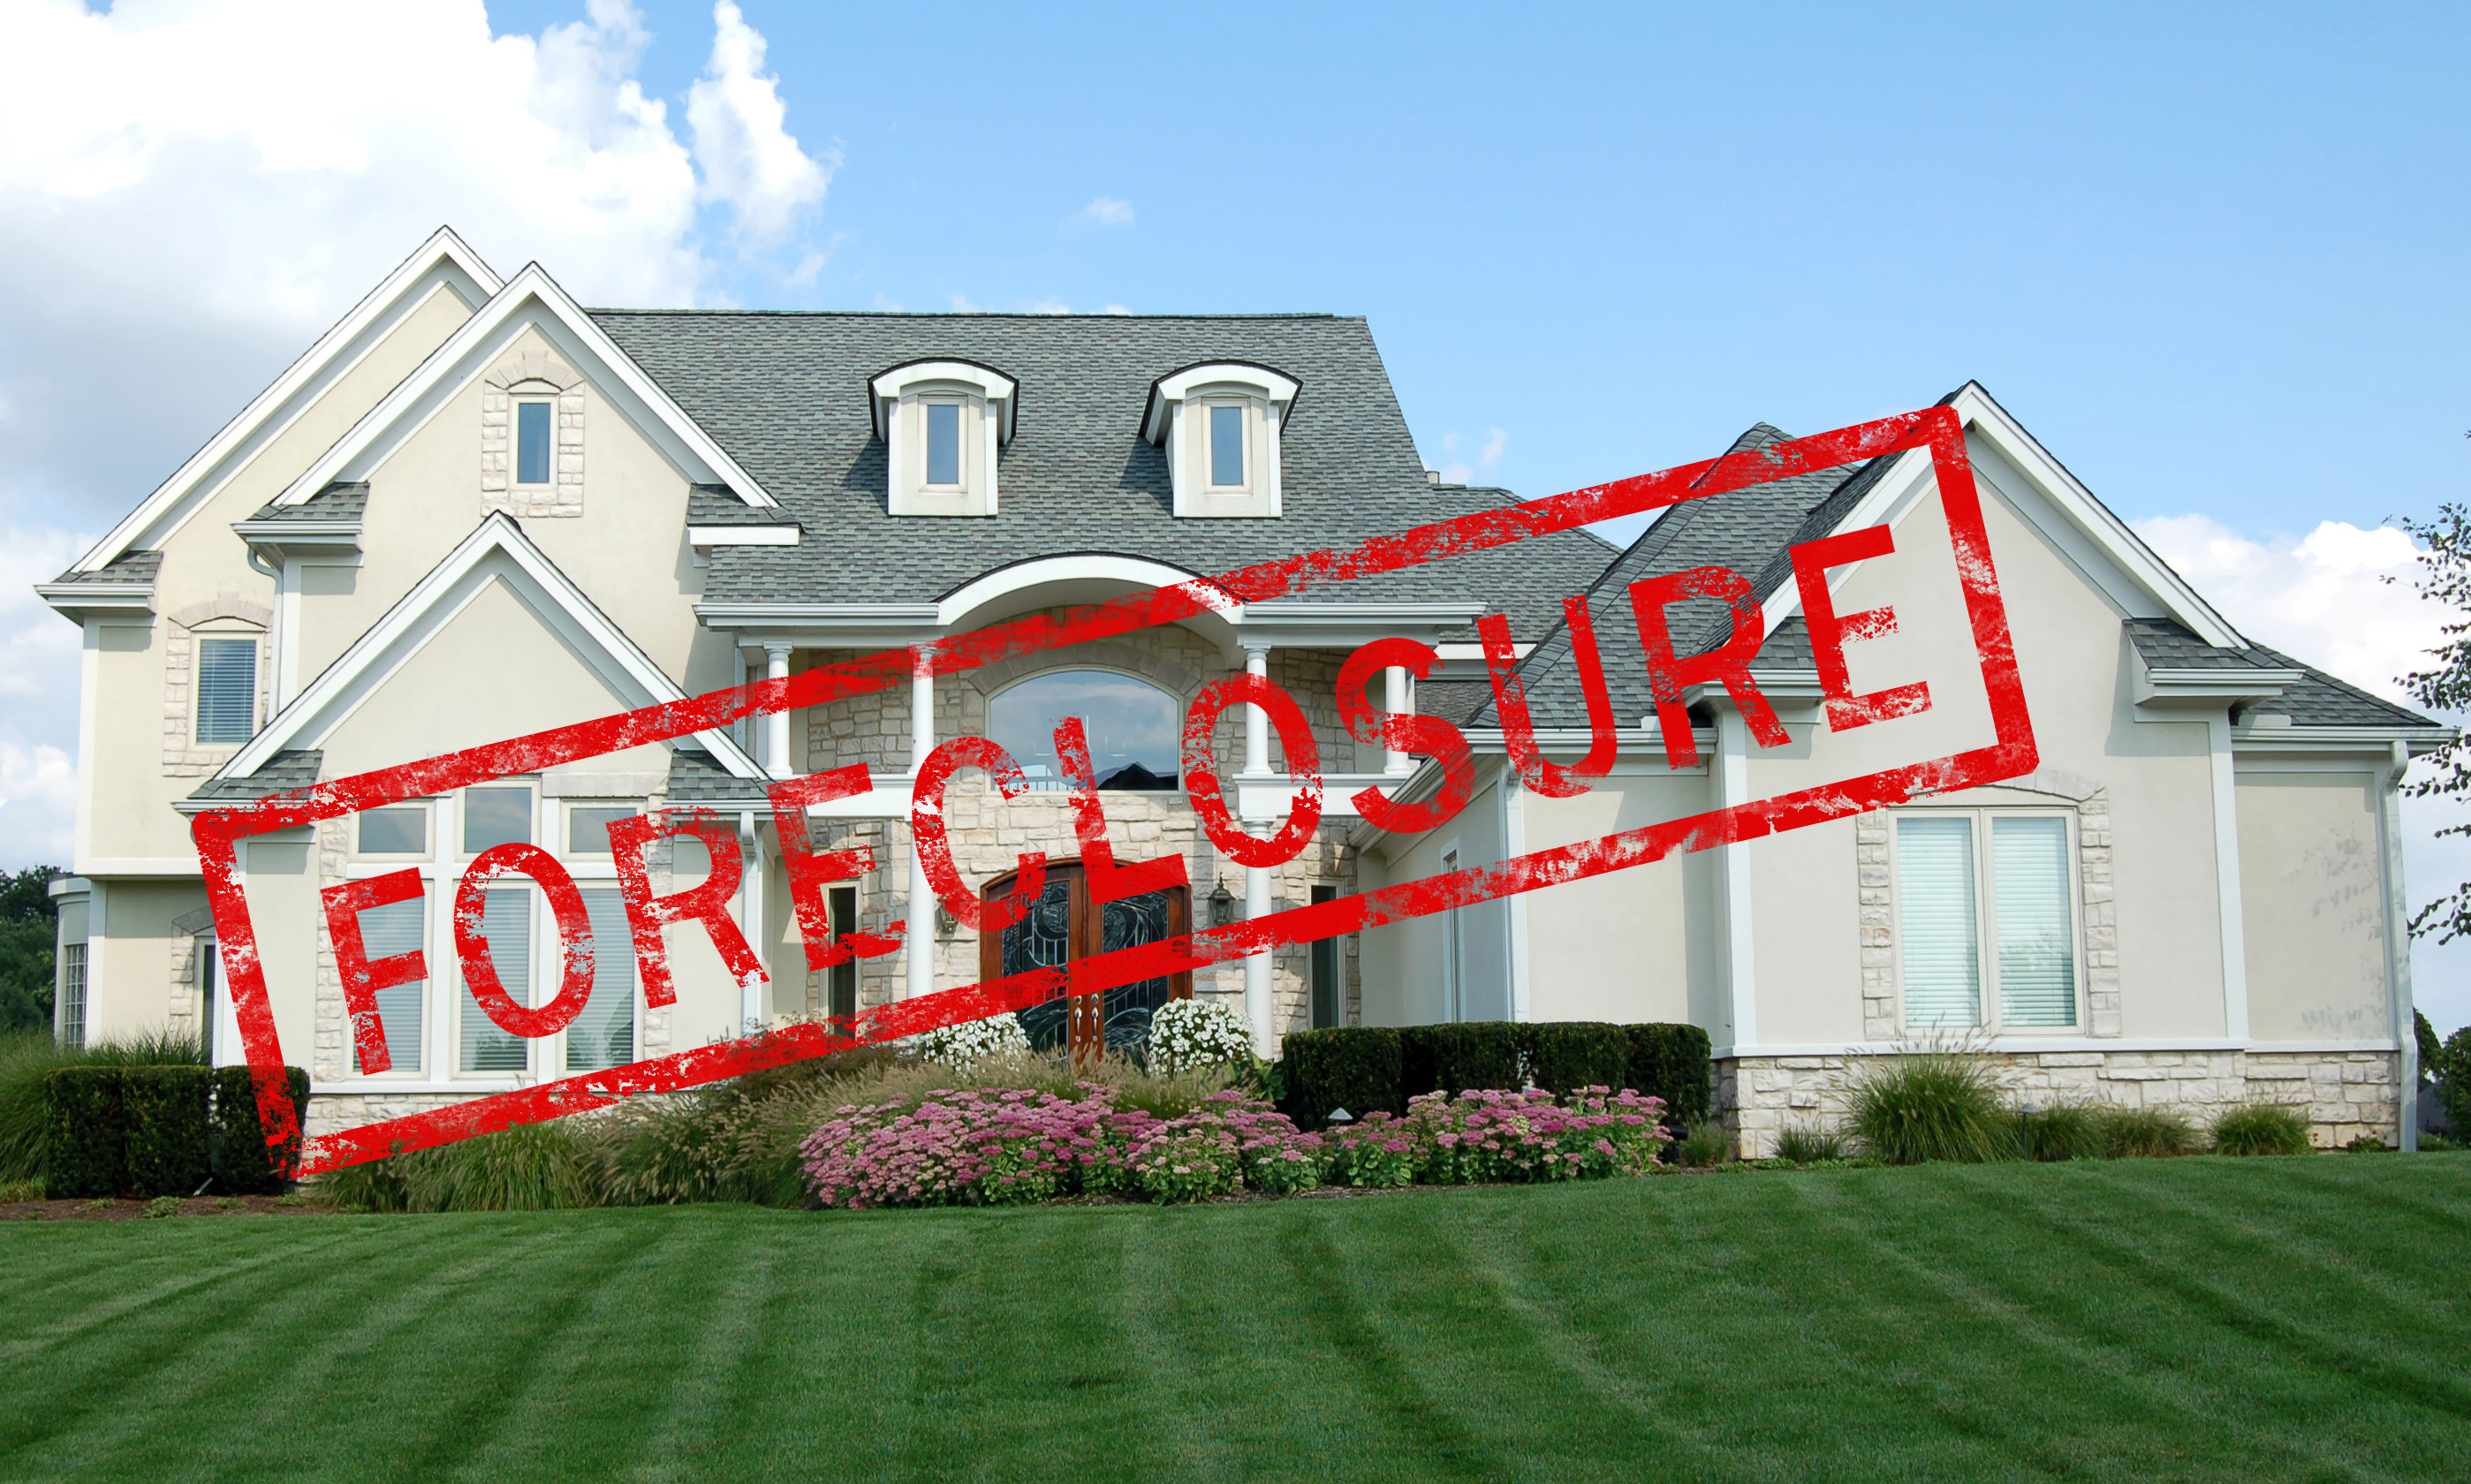 Call Silverpilen Corp. to discuss appraisals pertaining to Emmet foreclosures